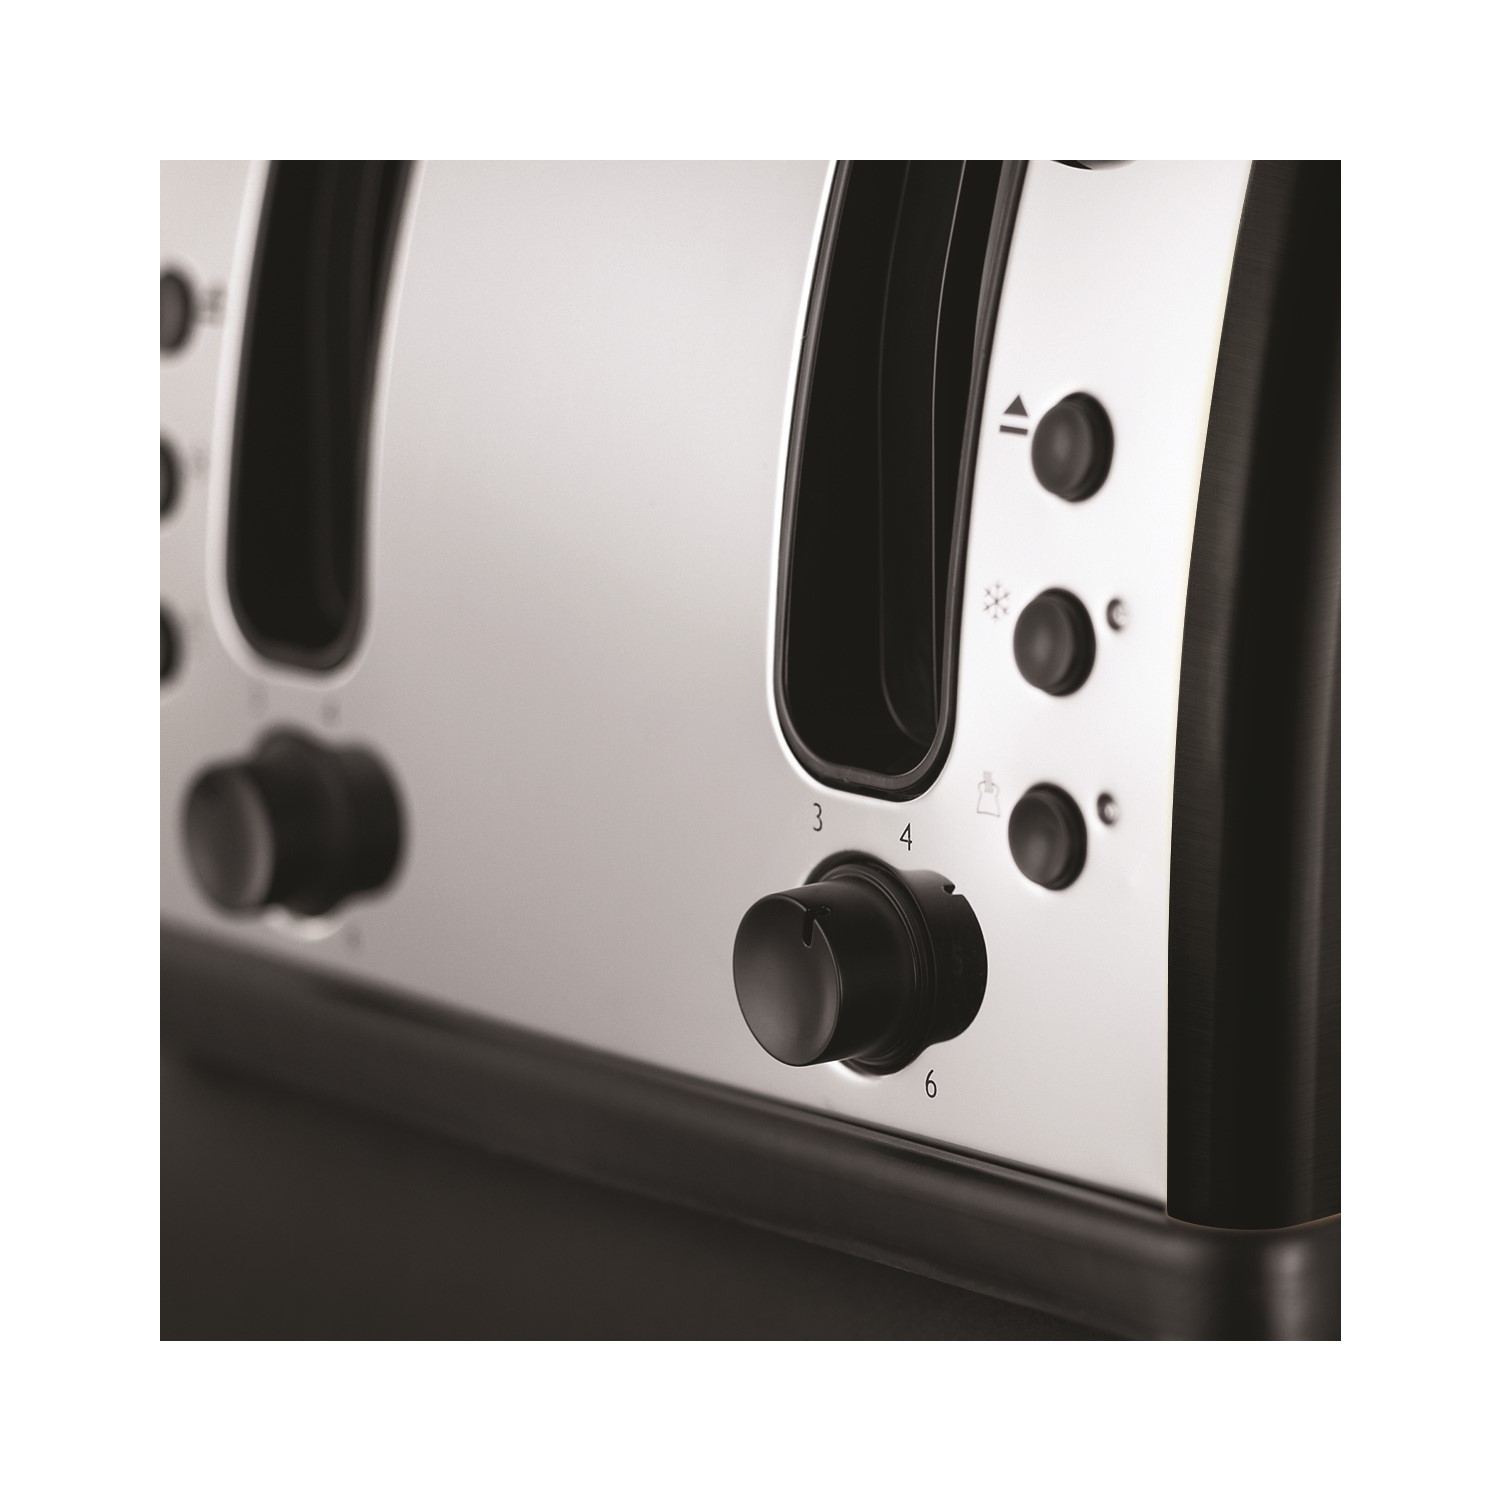 Russell Hobbs Legacy Toaster Review